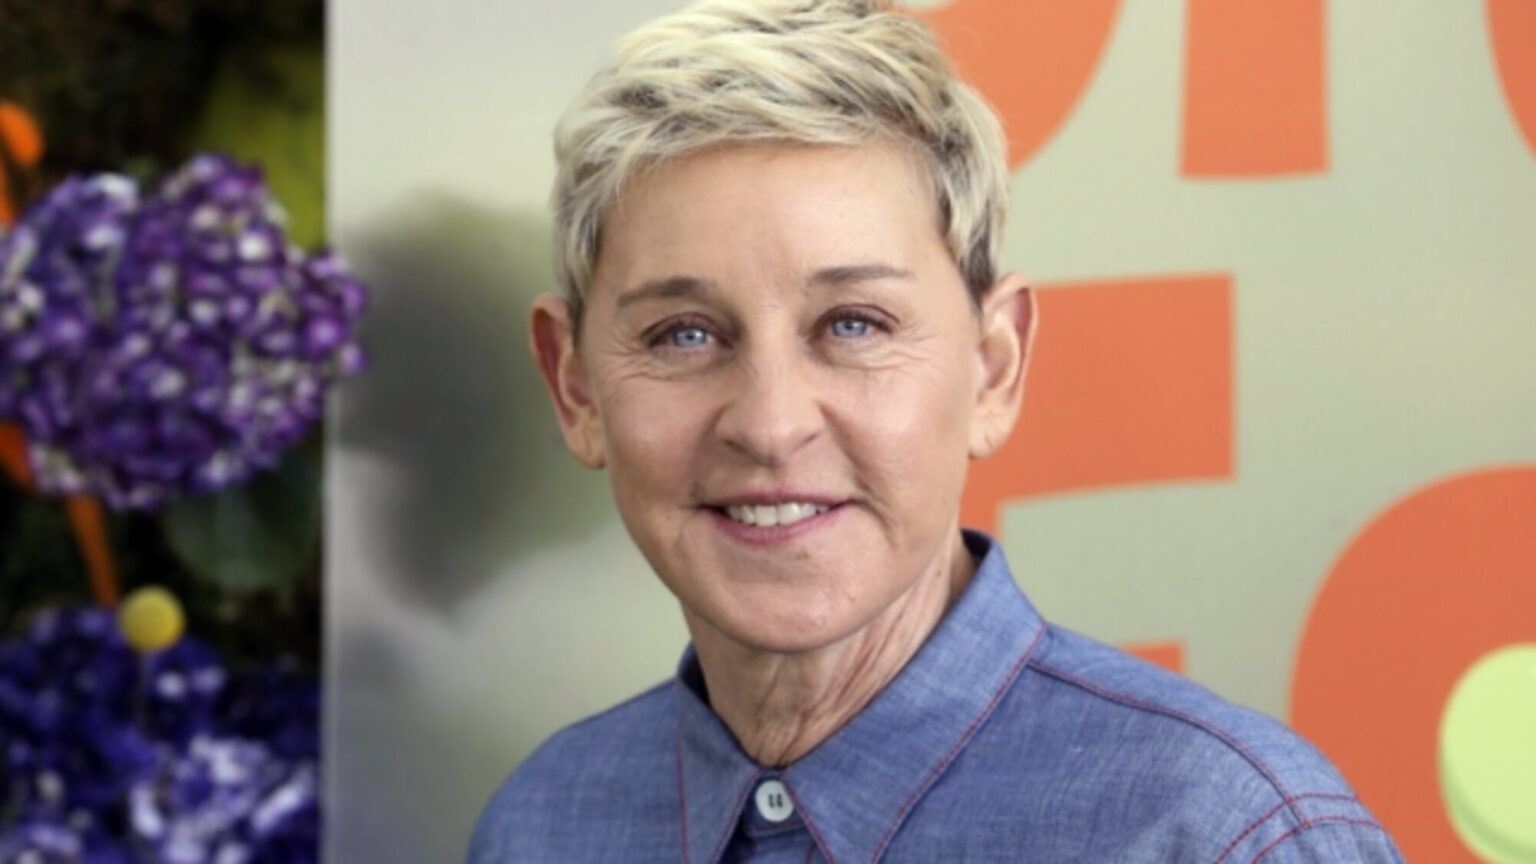 For years, media types and Hollywood insiders have whispered about Ellen DeGeneres. Who is the real Ellen? Here's what her friends had to say.